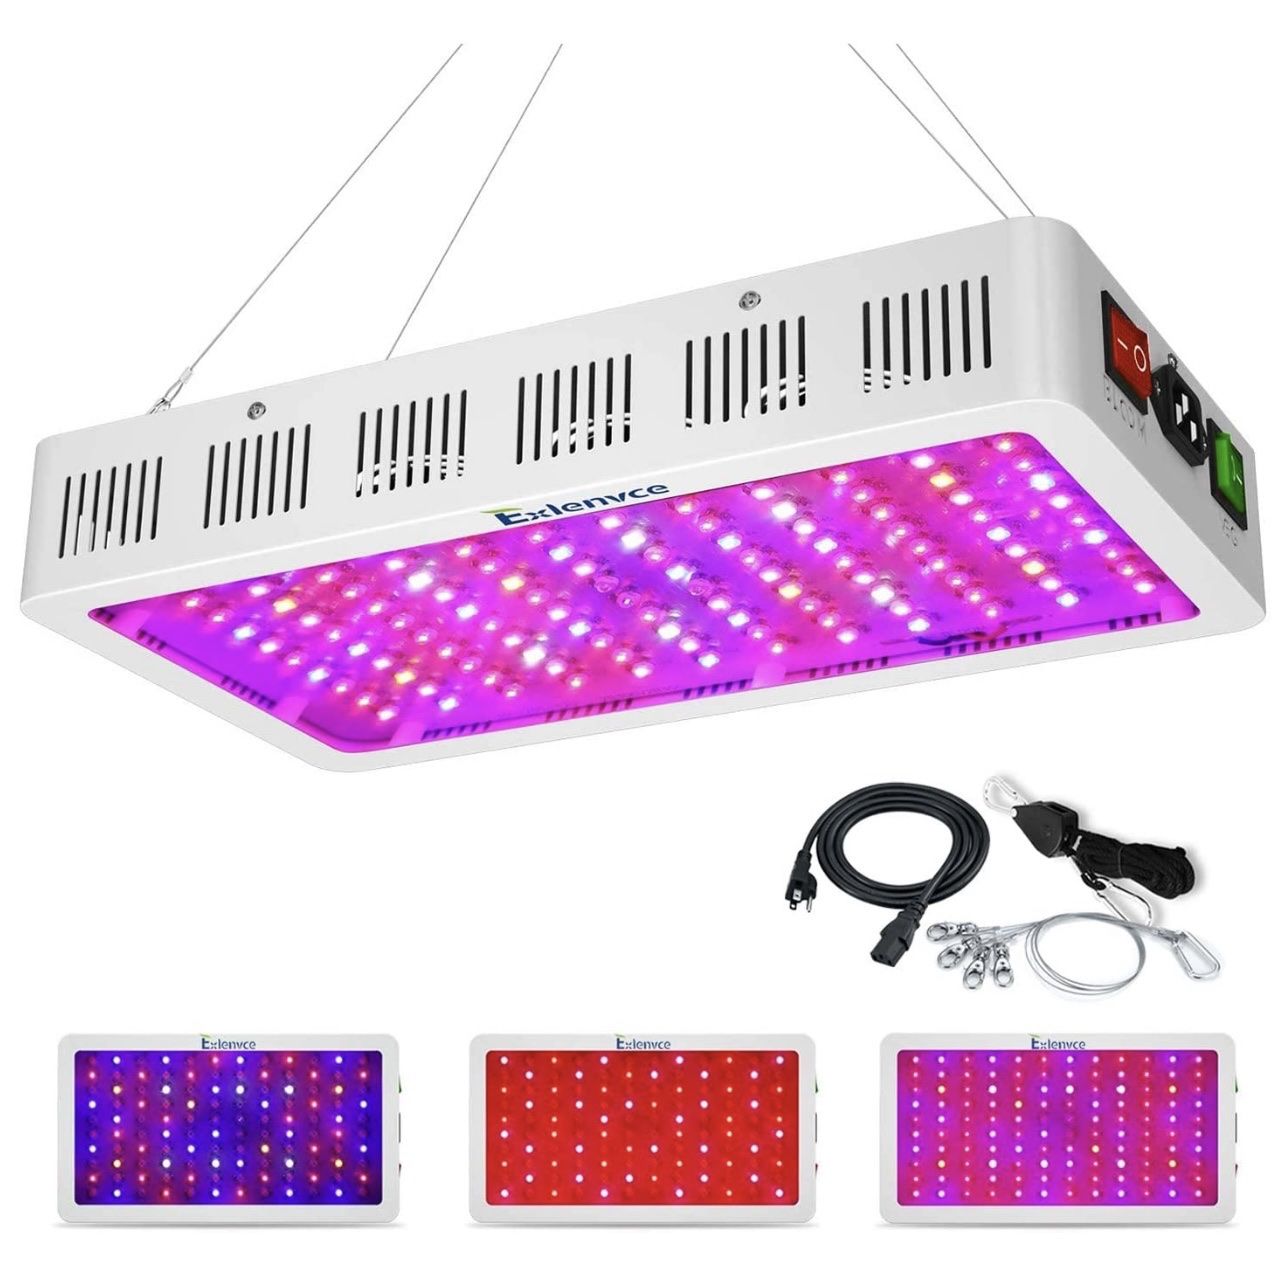 LED Grow Light Full Spectrum for Indoor Plants Veg and Flower,led Plant Growing Light Fixtures with Daisy Chain Function (Triple-Chips 15W LED)